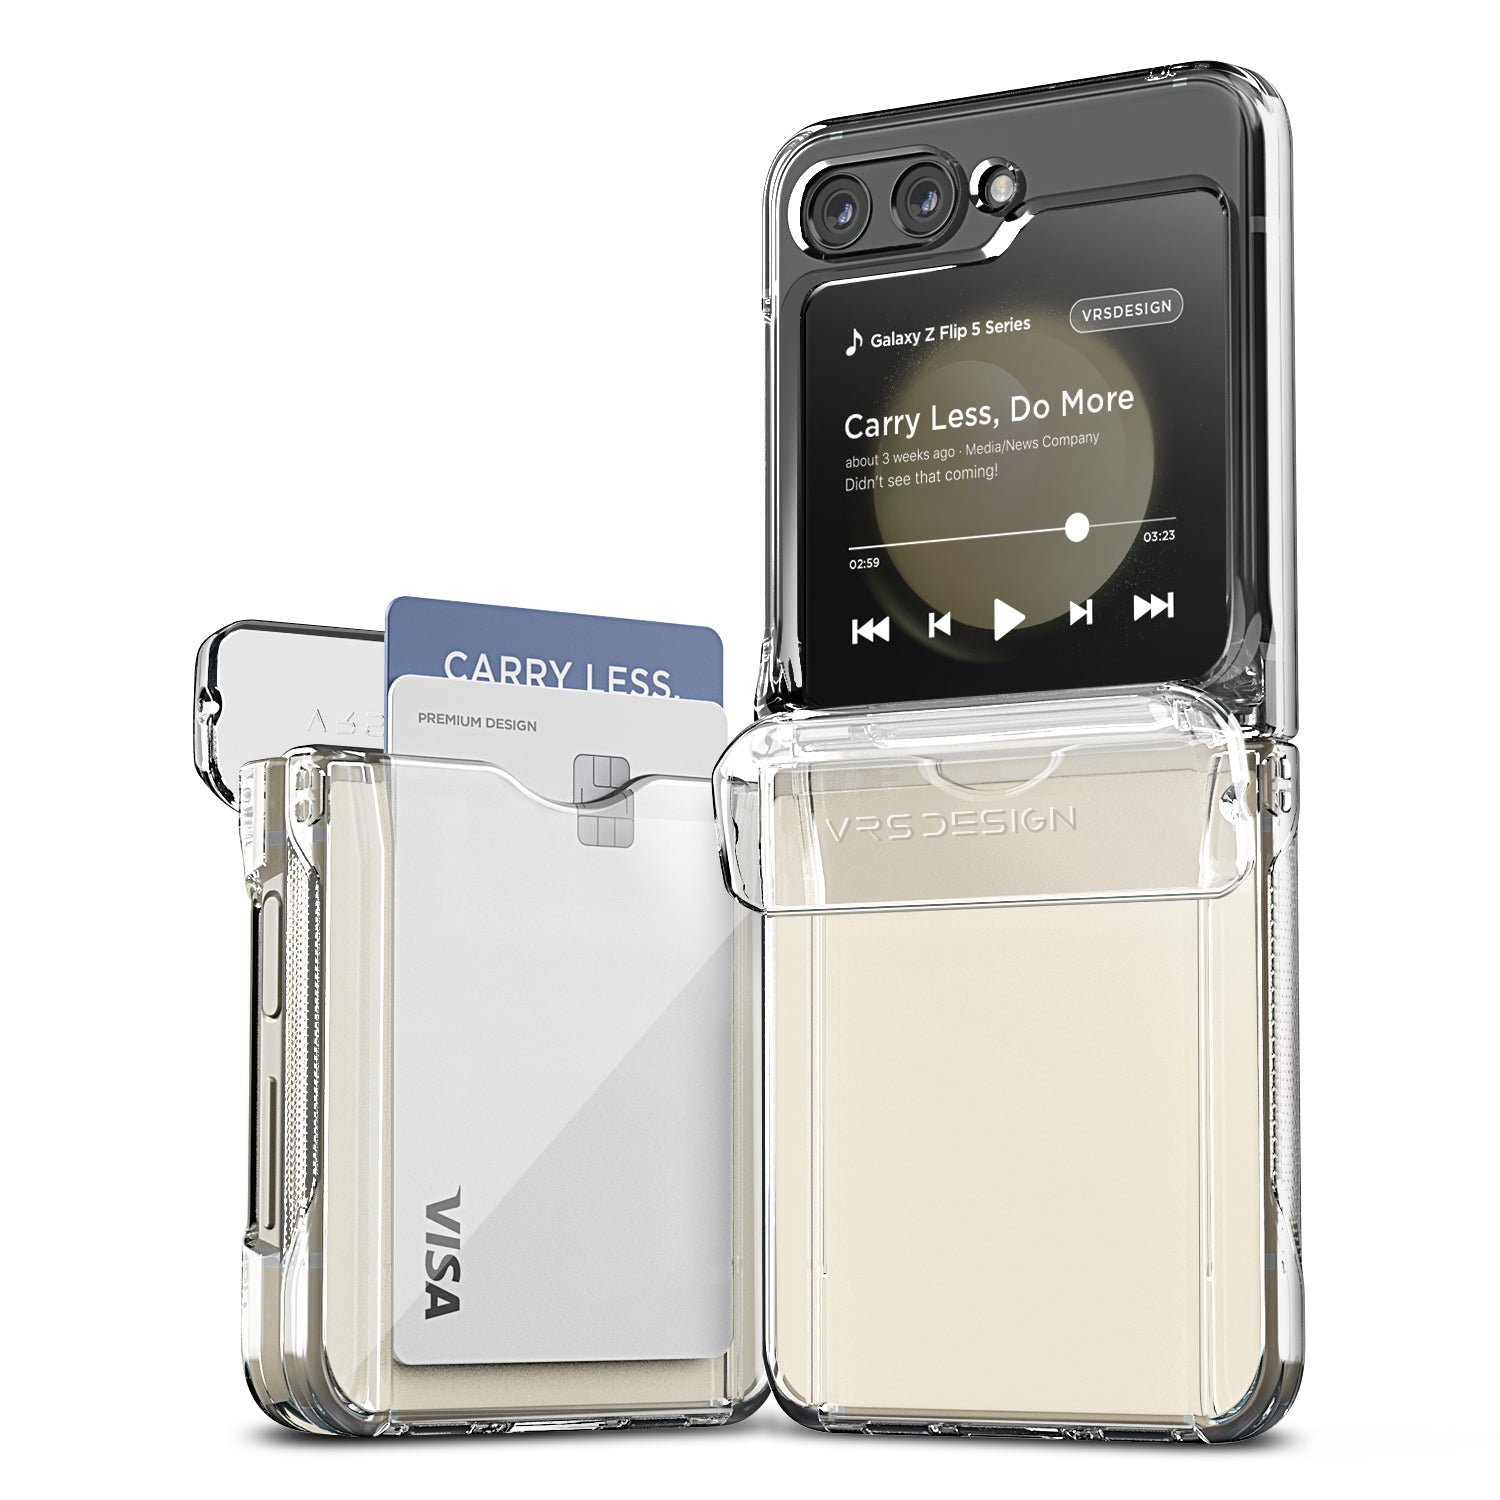 Clamshell Card Bag Wallet Mobile Phone Protective Case,for Galaxy